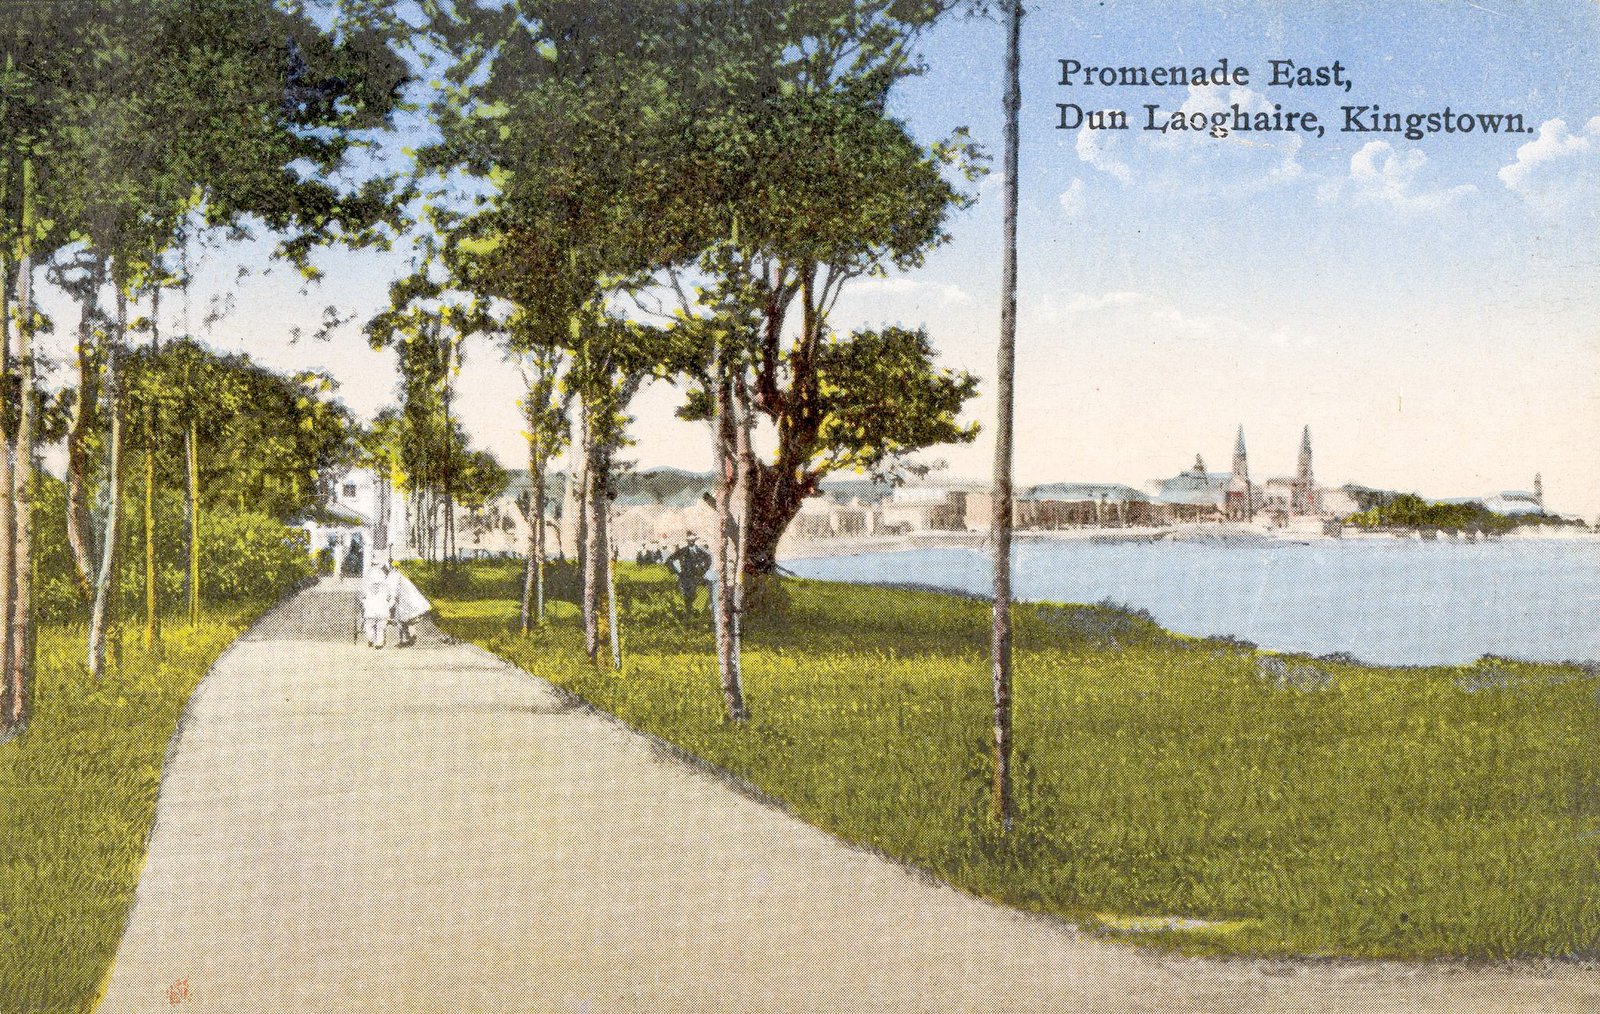 Dun Laoghaire Local Areas Old Postcards